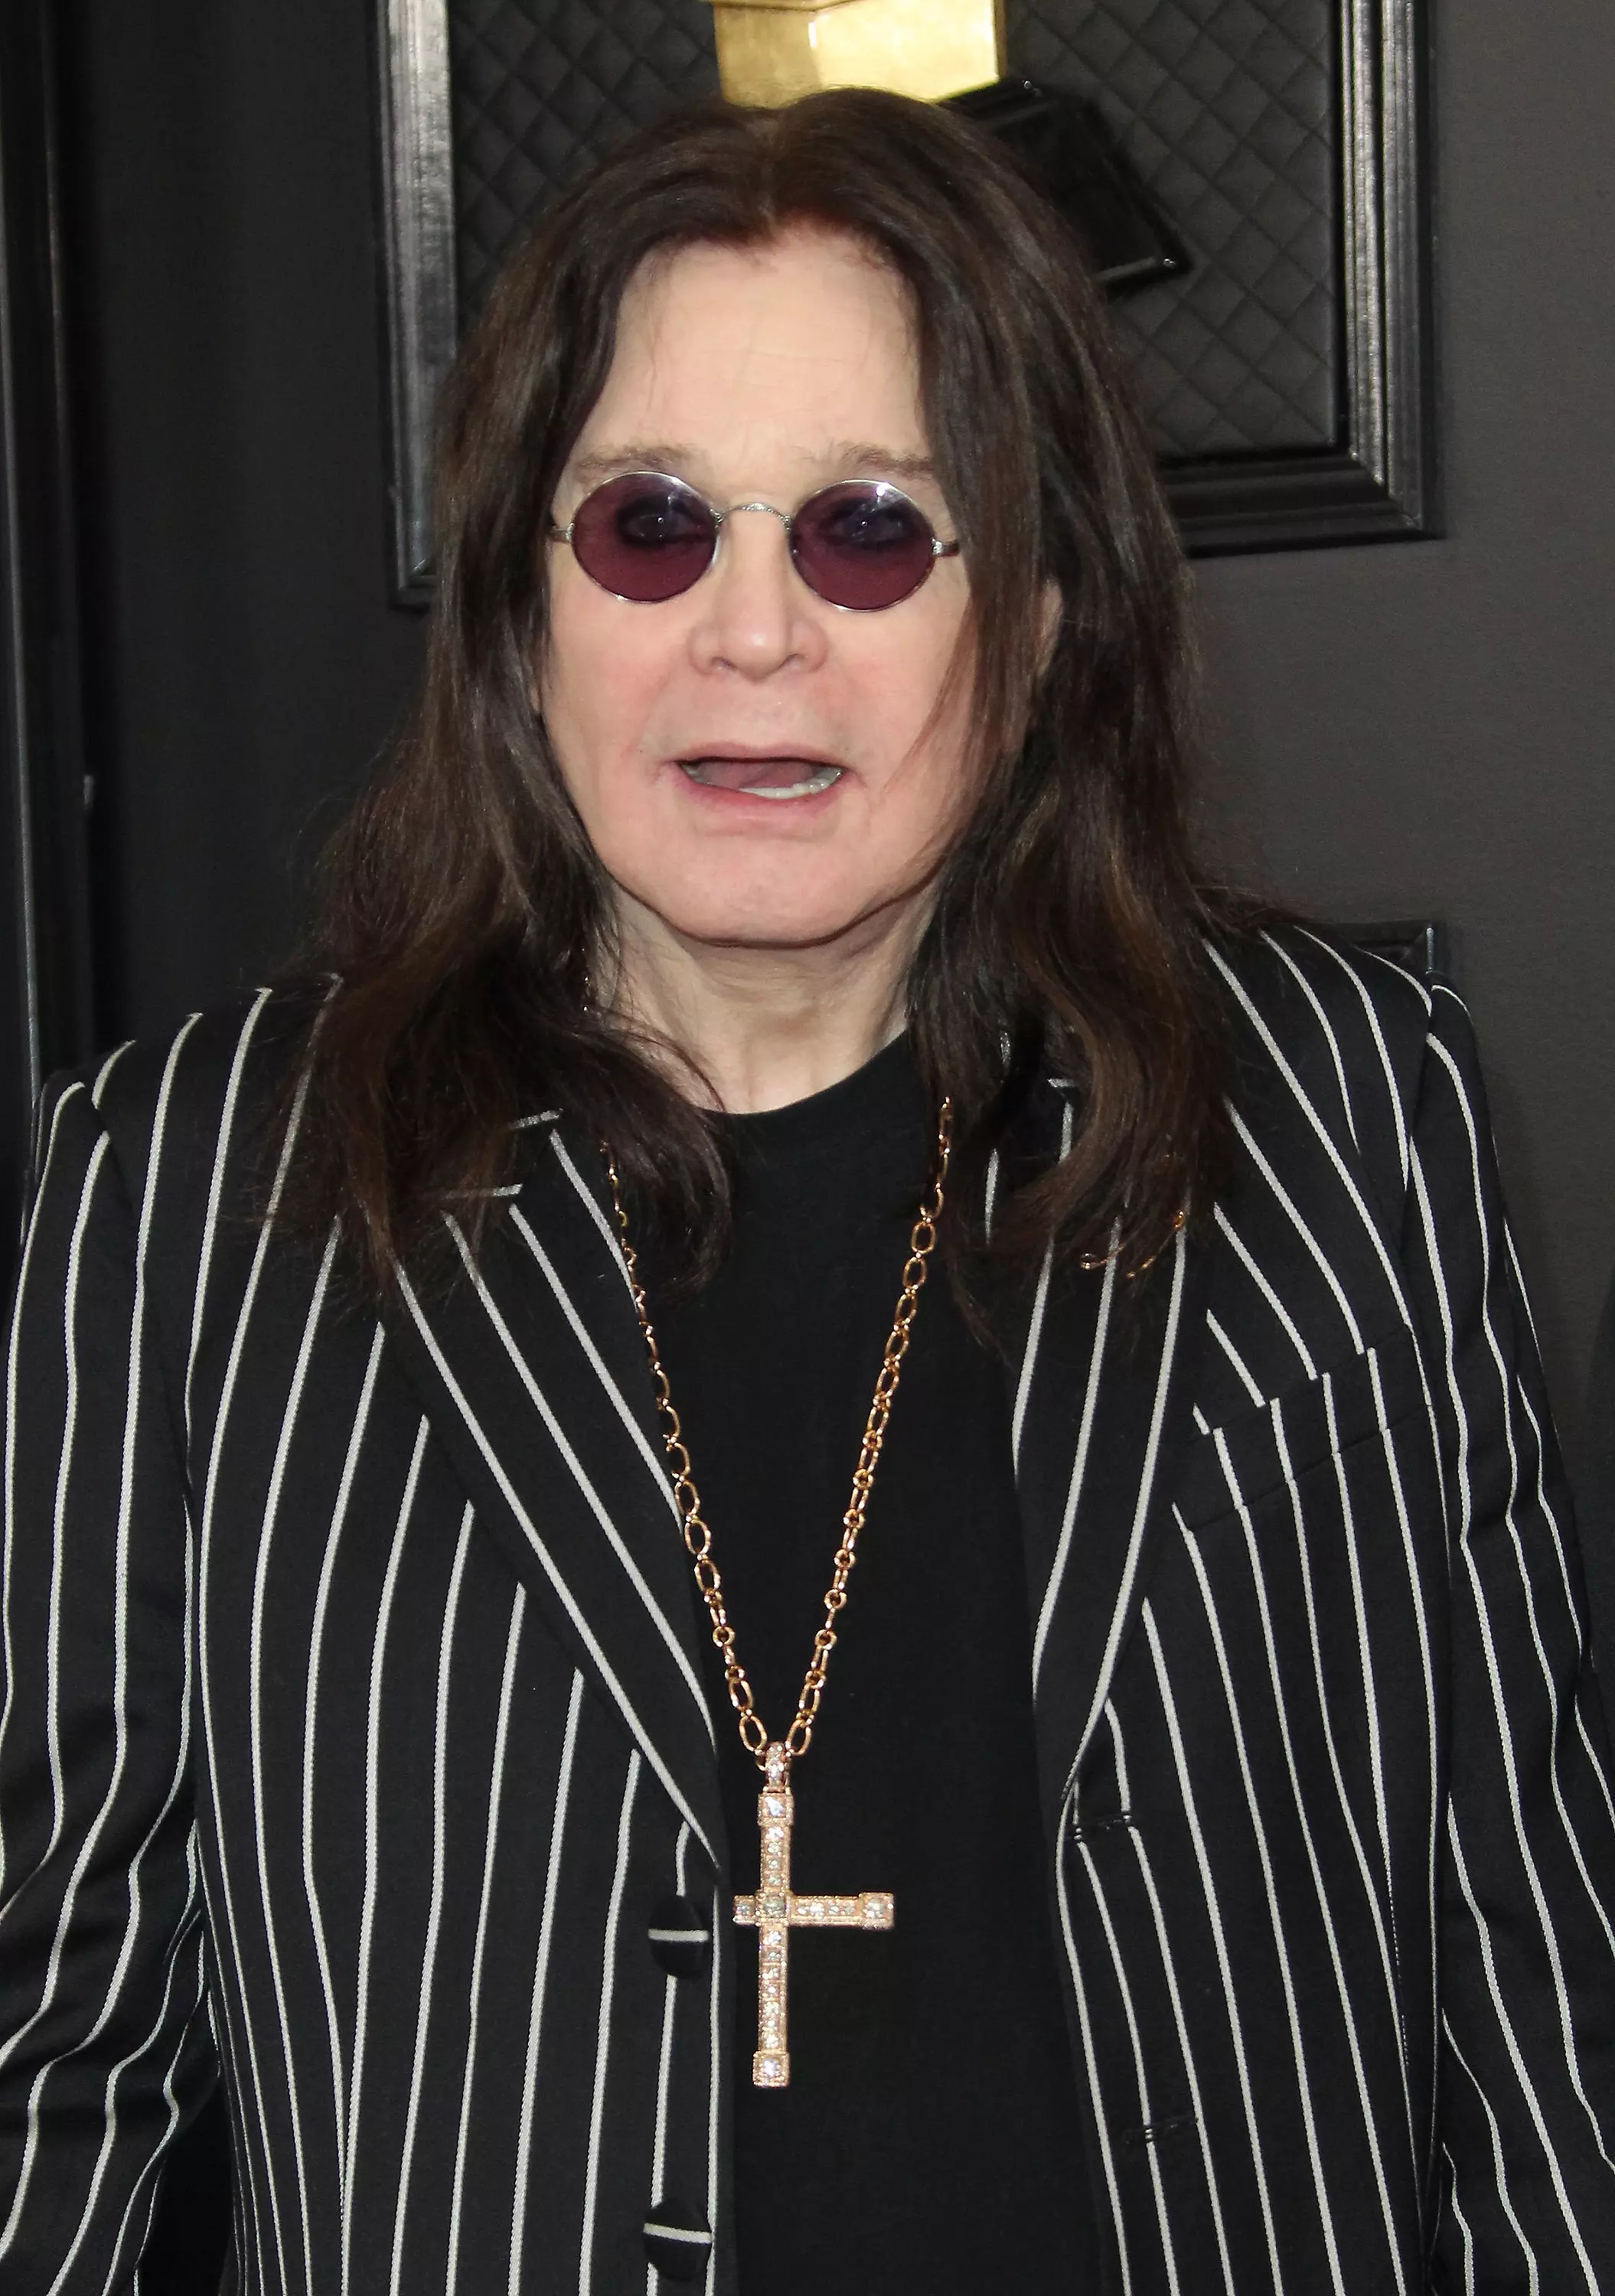 Ozzy said he was the 'calmest he'd ever been' when he tried to kill Sharon.